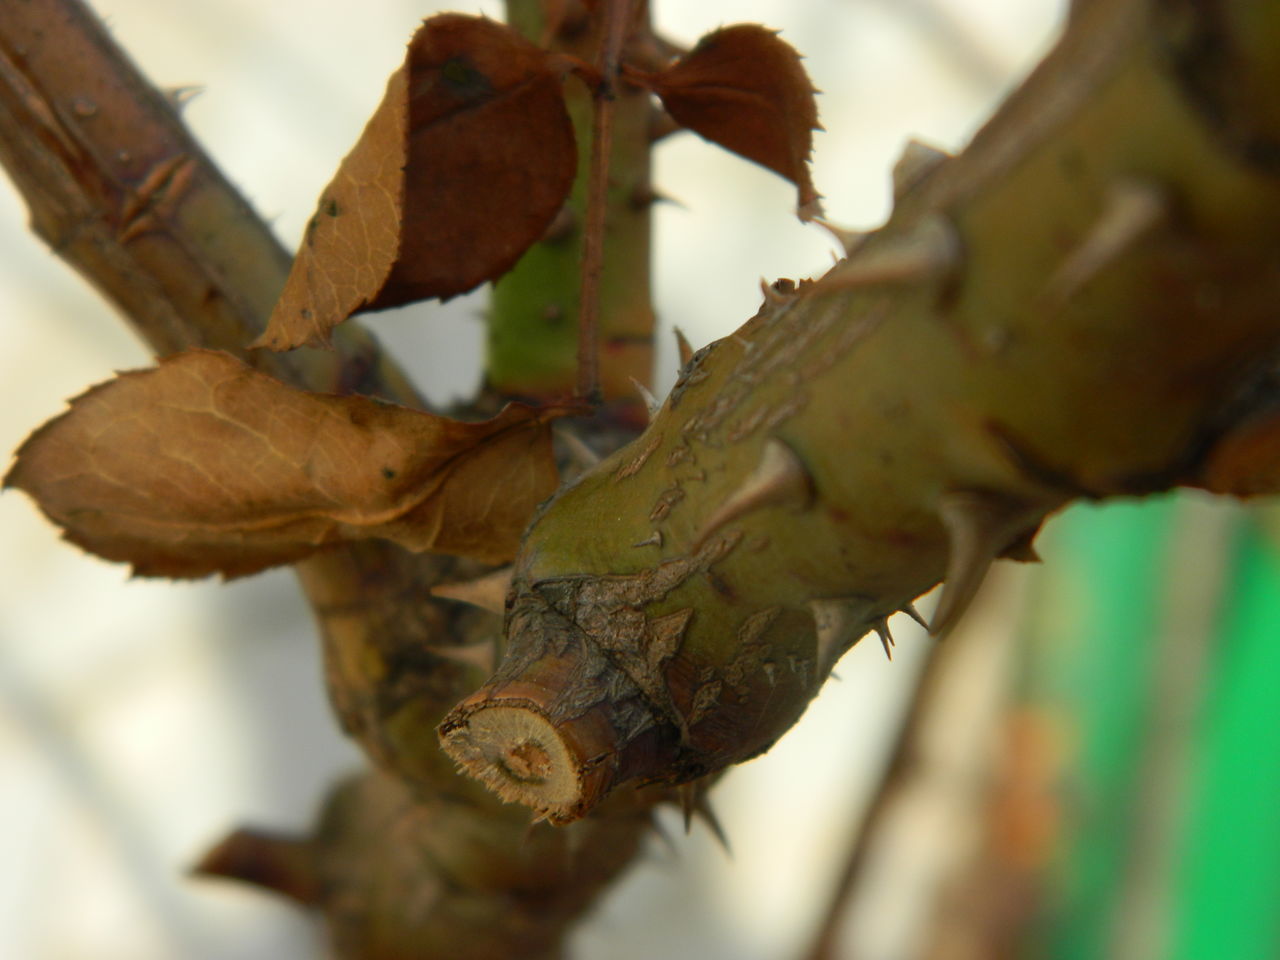 close-up, focus on foreground, leaf, selective focus, wood - material, nature, dry, day, rusty, outdoors, branch, metal, no people, twig, plant, autumn, tree, damaged, aging process, weathered